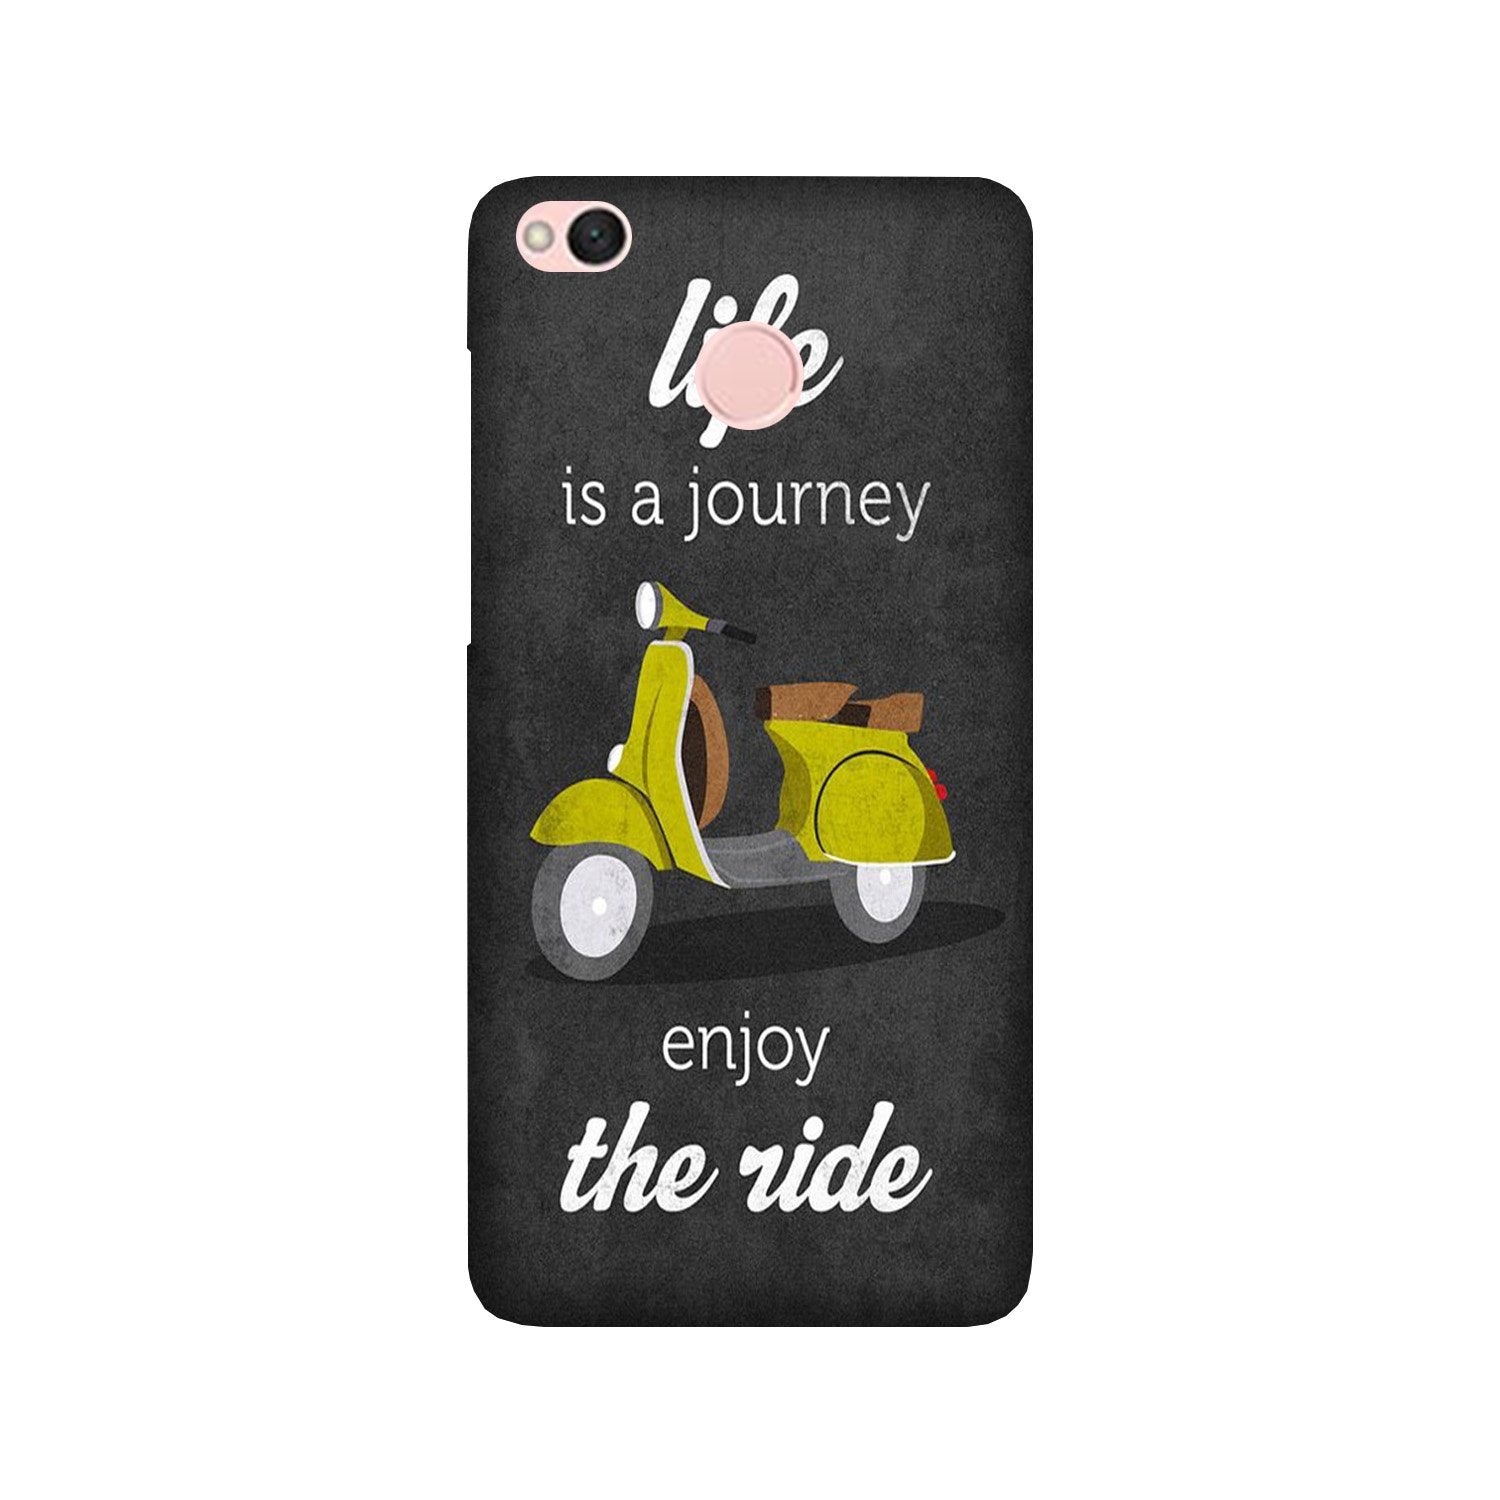 Life is a Journey Case for Redmi 4 (Design No. 261)